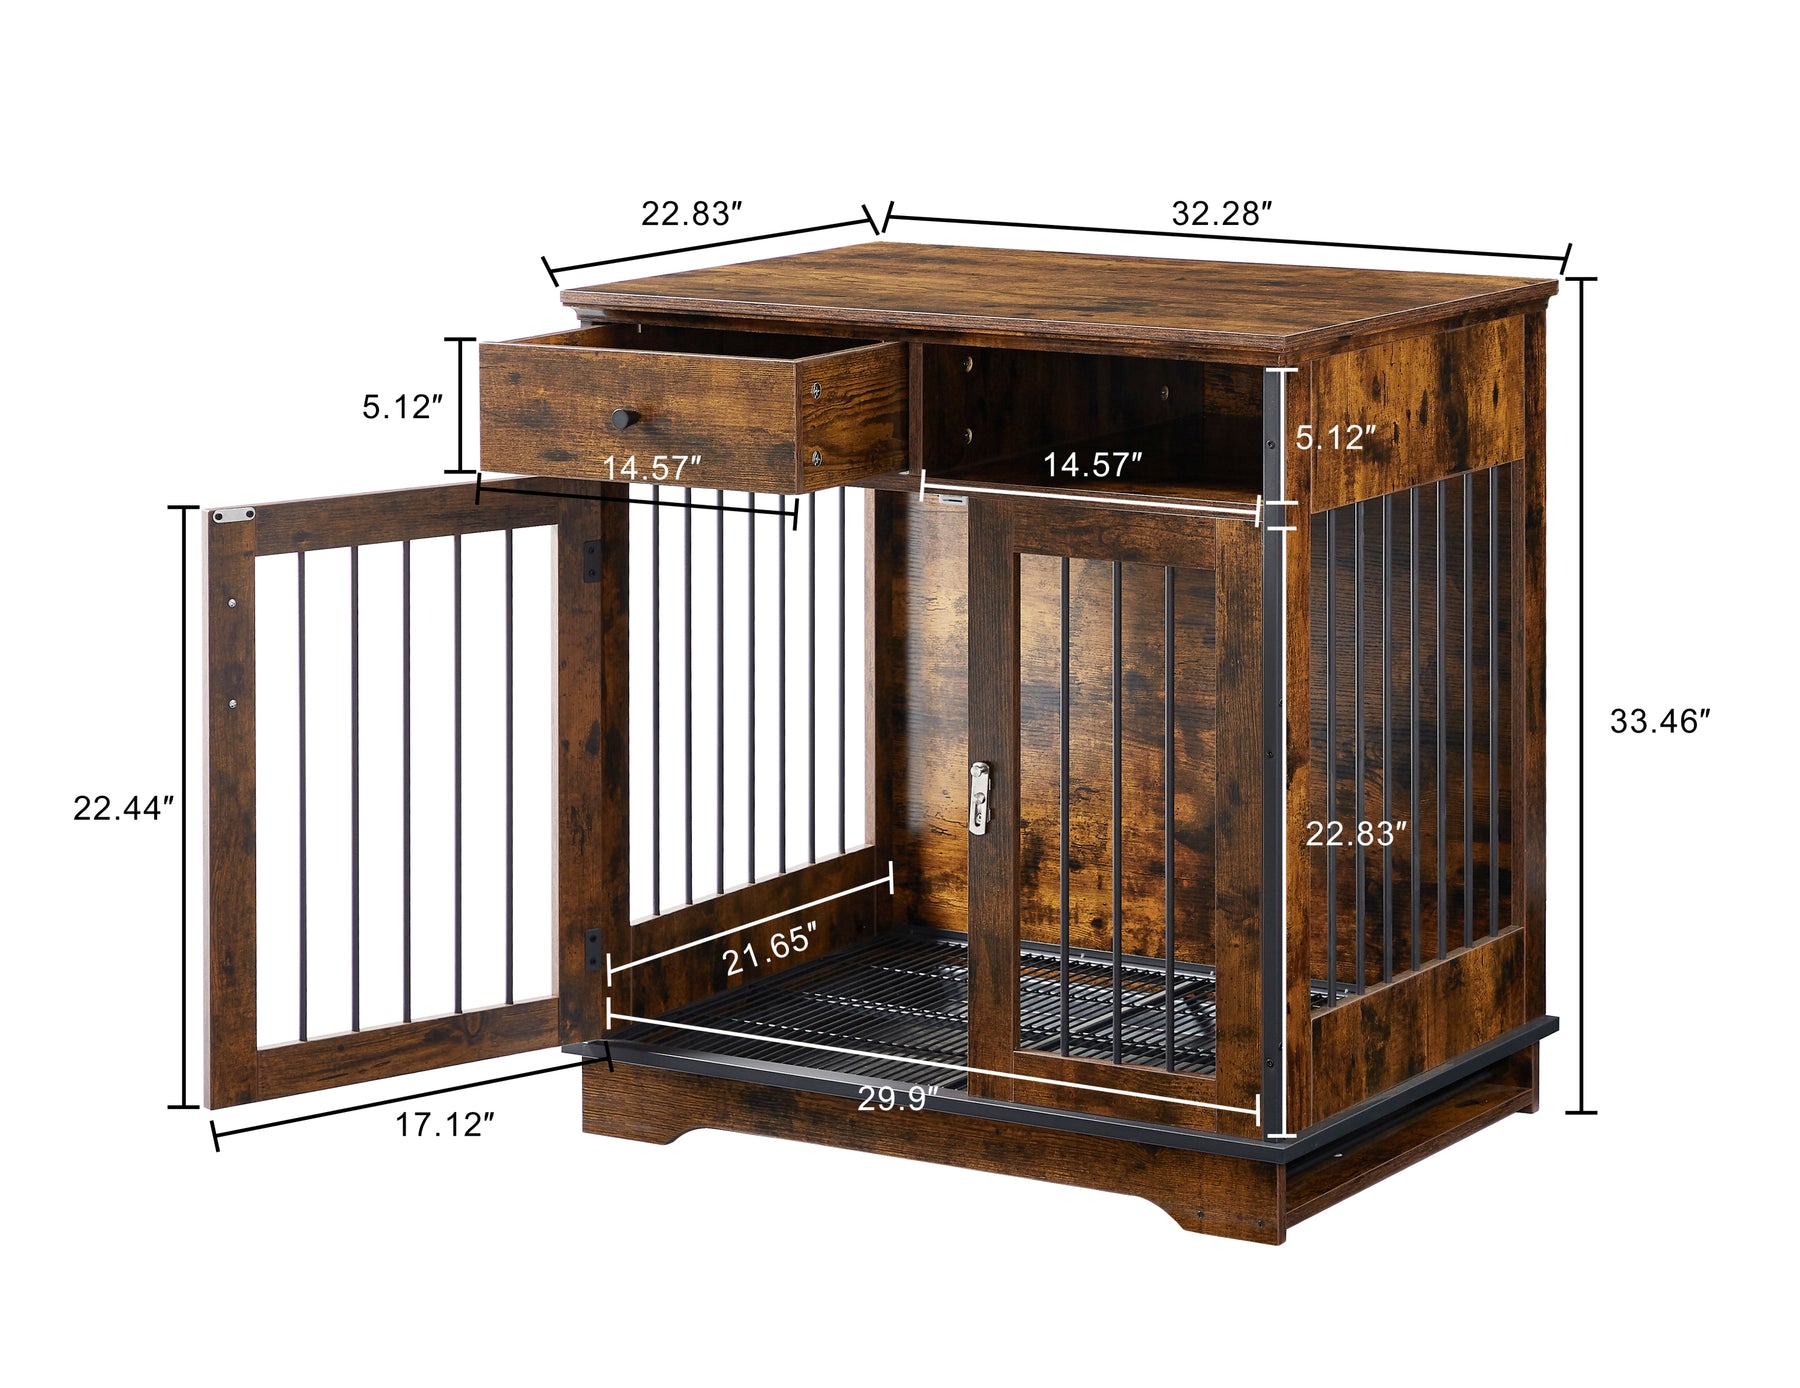 Furniture Dog crate, indoor pet crate end tables, decorative wooden kennels with removable trays. Rustic Brown, 32.3'' W x 22.8'' D x 33.5'' H. - Tonkn